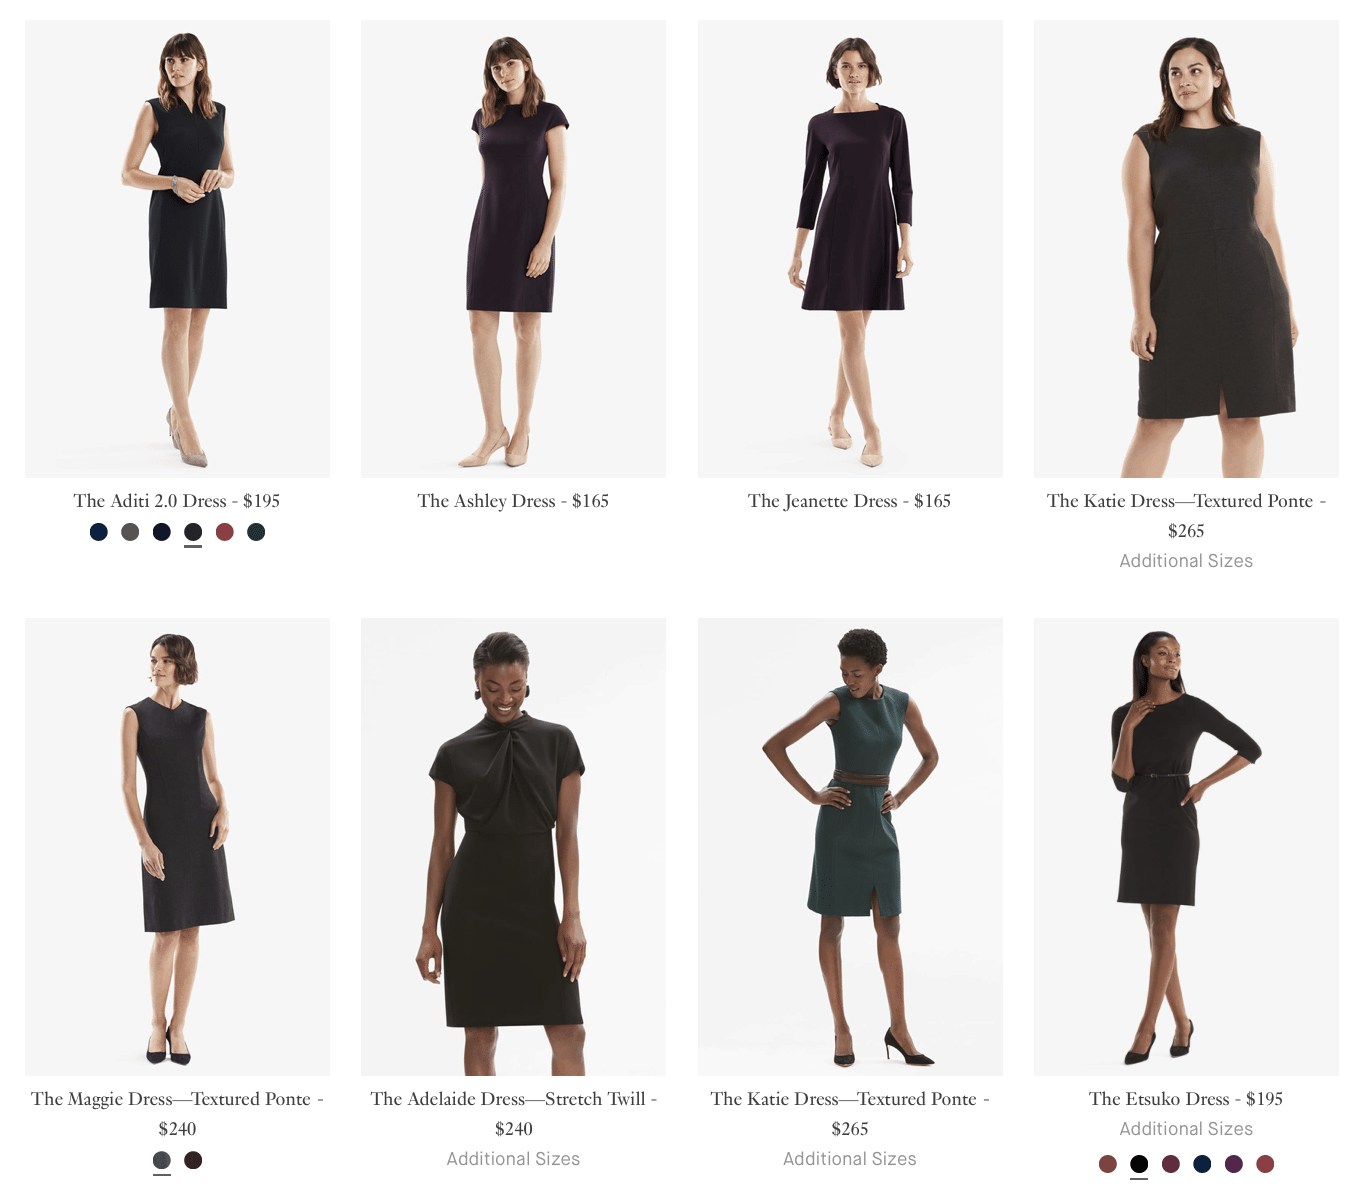 A screenshot of the MM.LaFleur website showing models in a variety of sizes and ethnicities